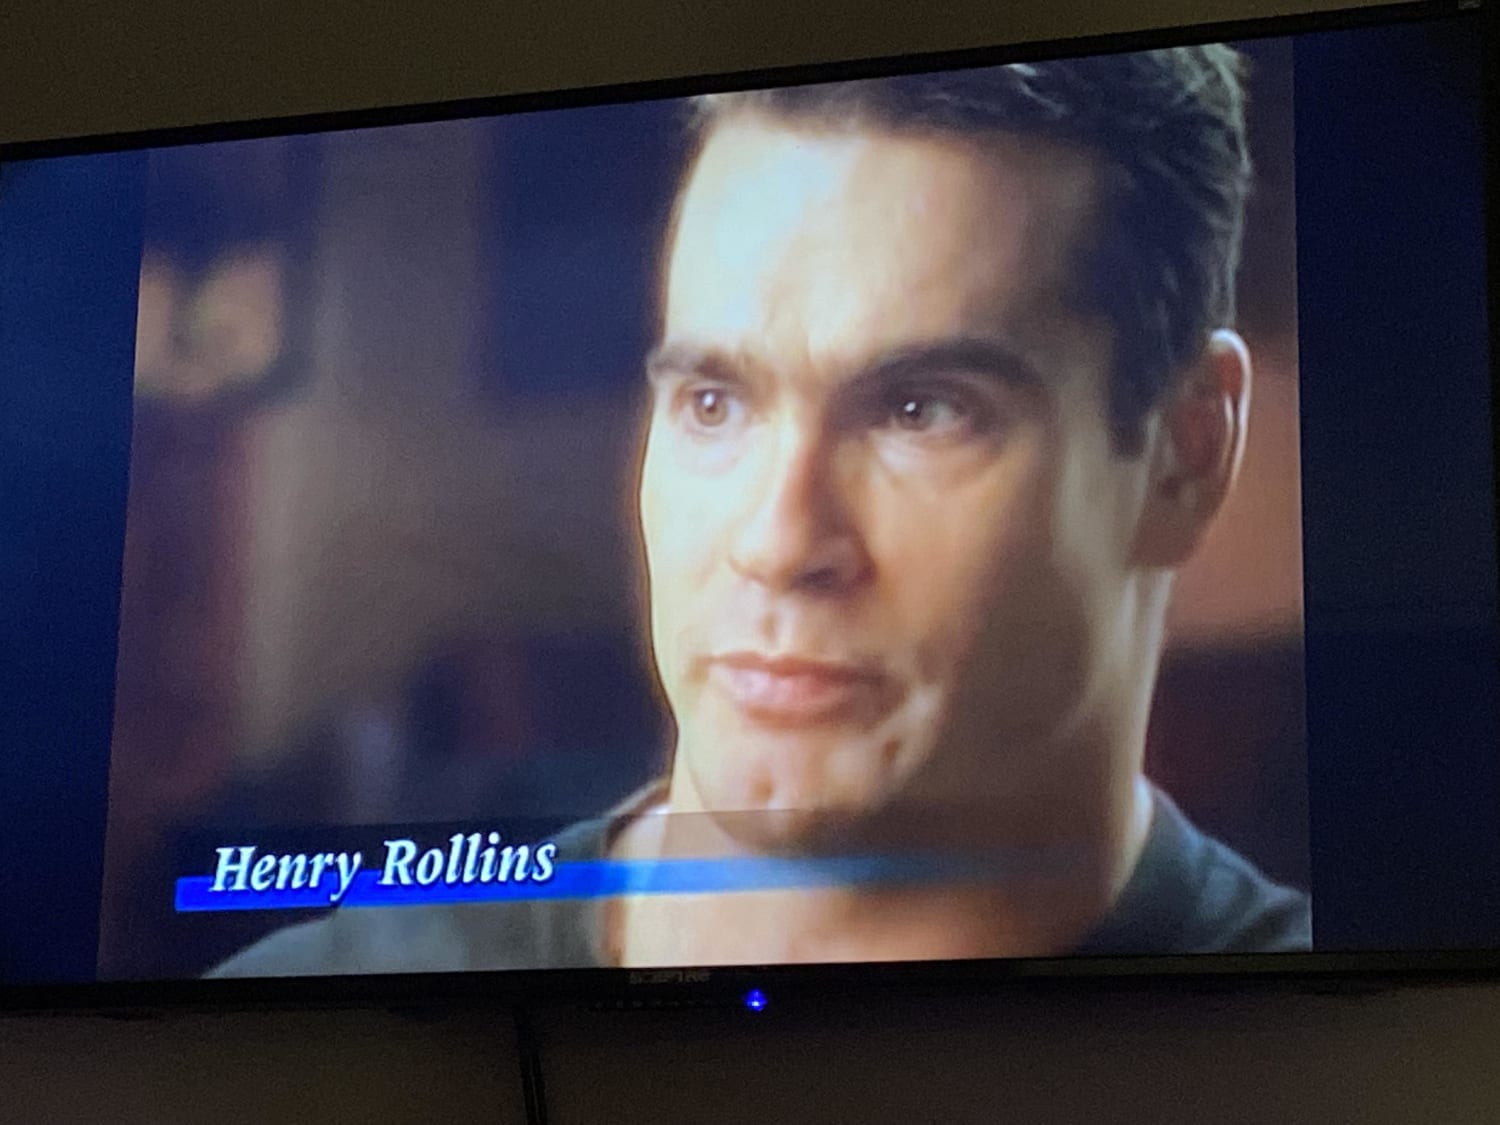 Henry Rollins on S8E21 of Unsolved Mysteries is the true crime/punk cross over I need to distract myself from the state of this world